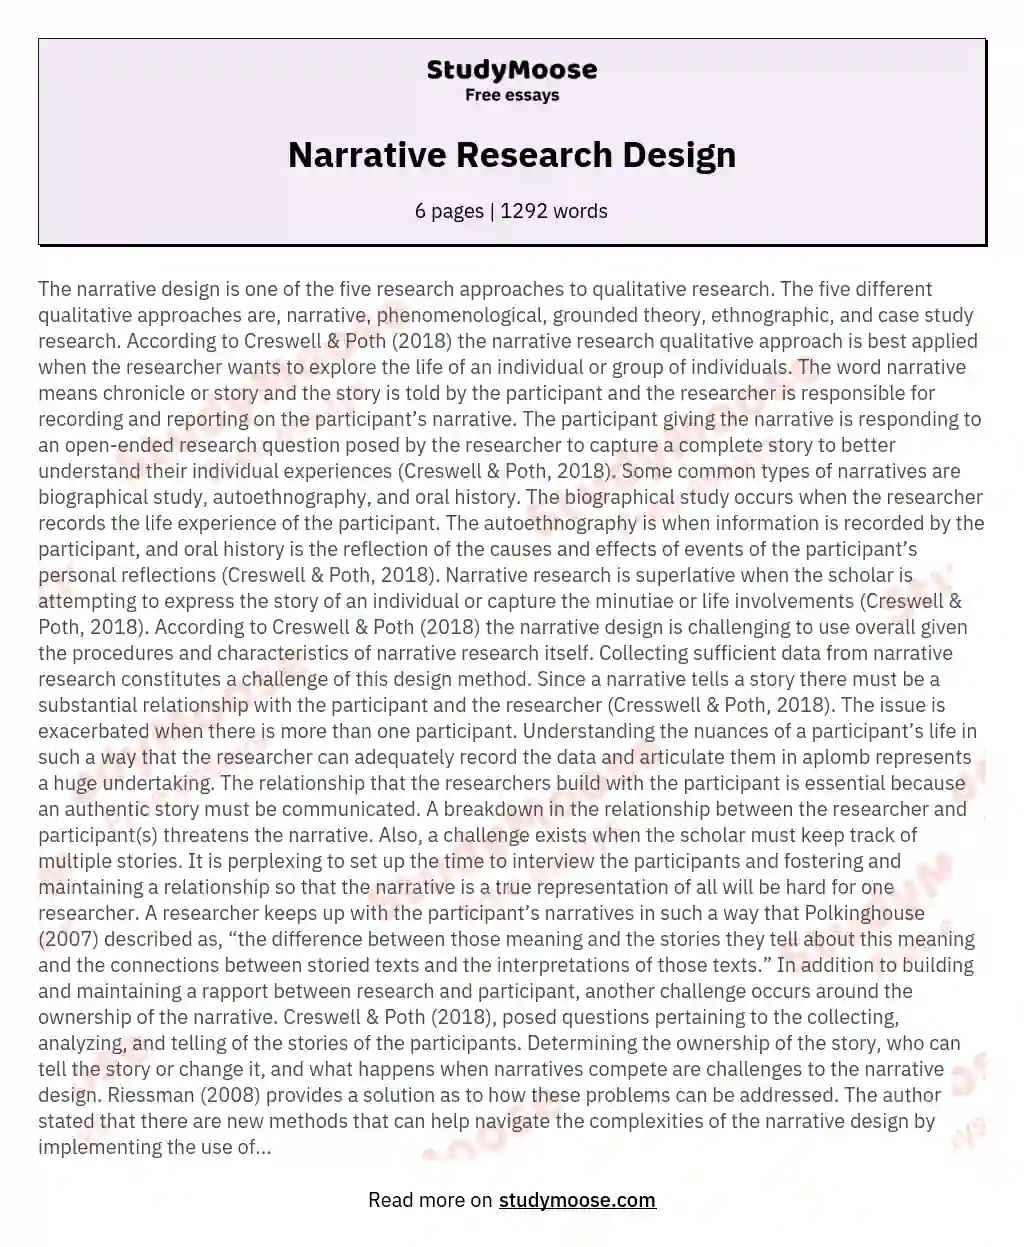 example of narrative analysis research title